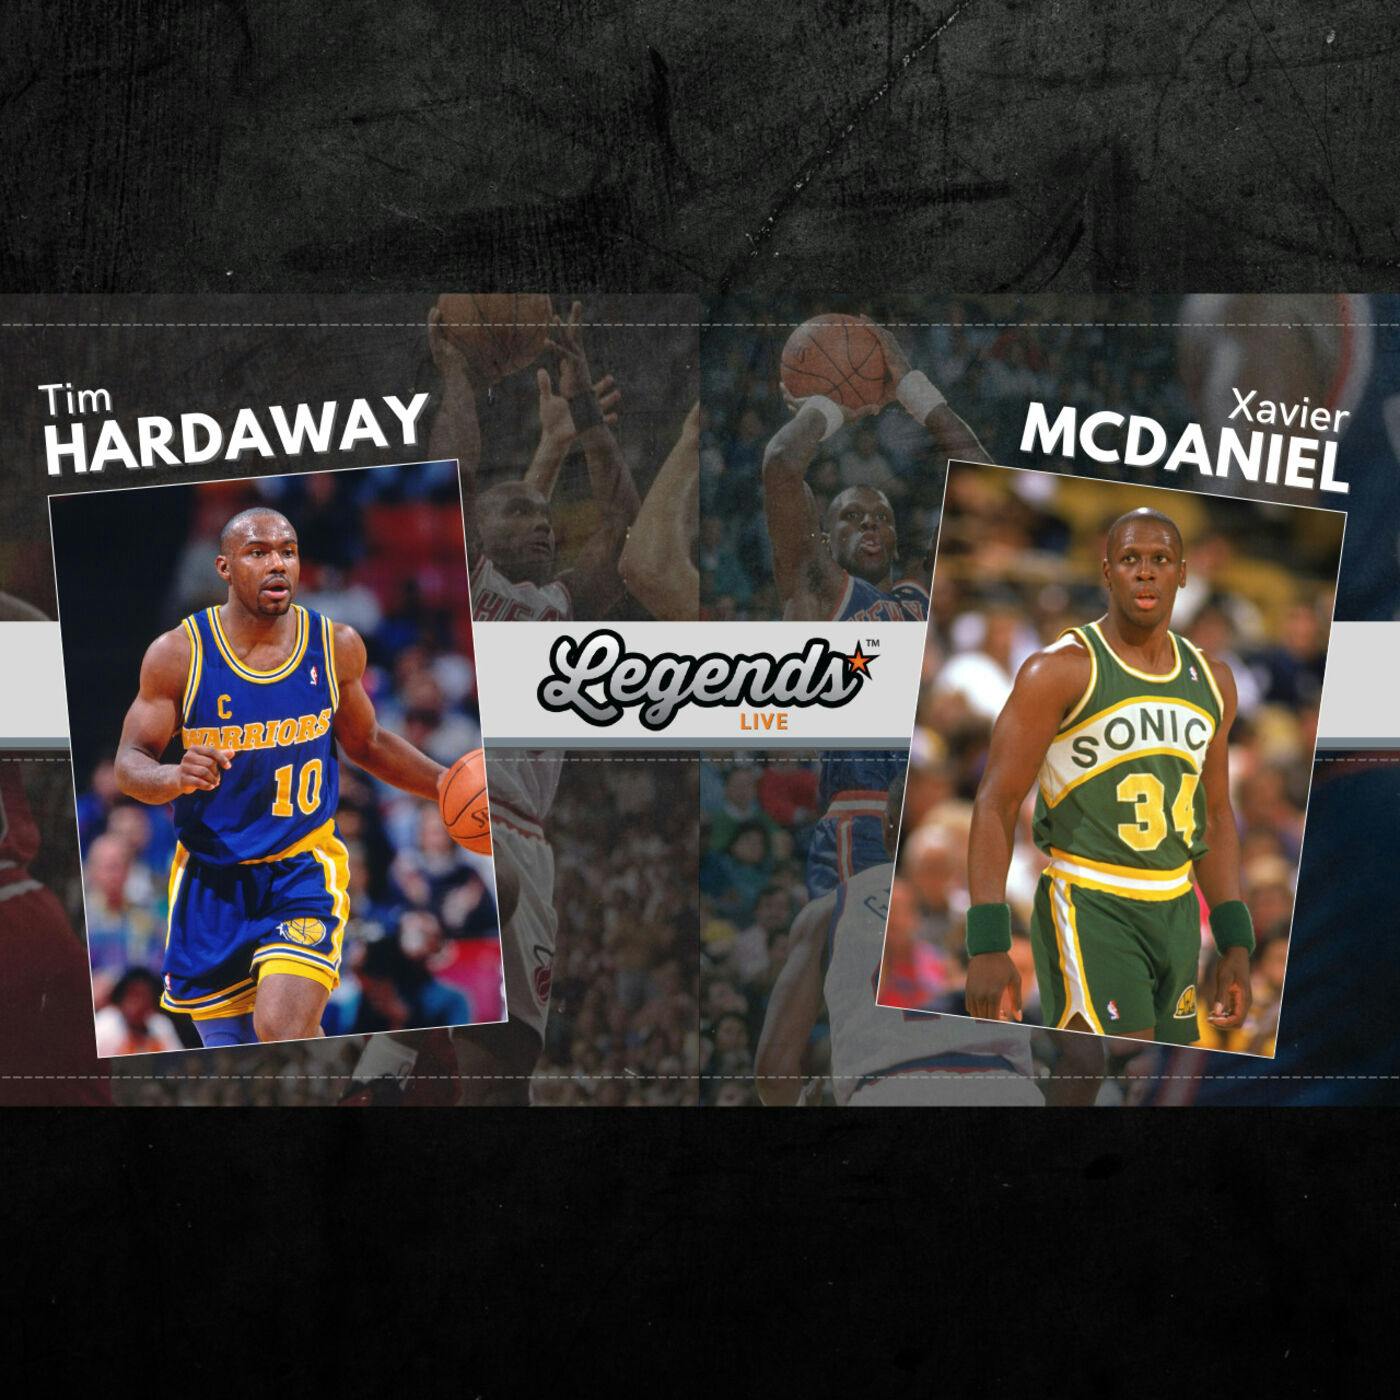 Legends Live with Tim Hardaway and Xavier McDaniel